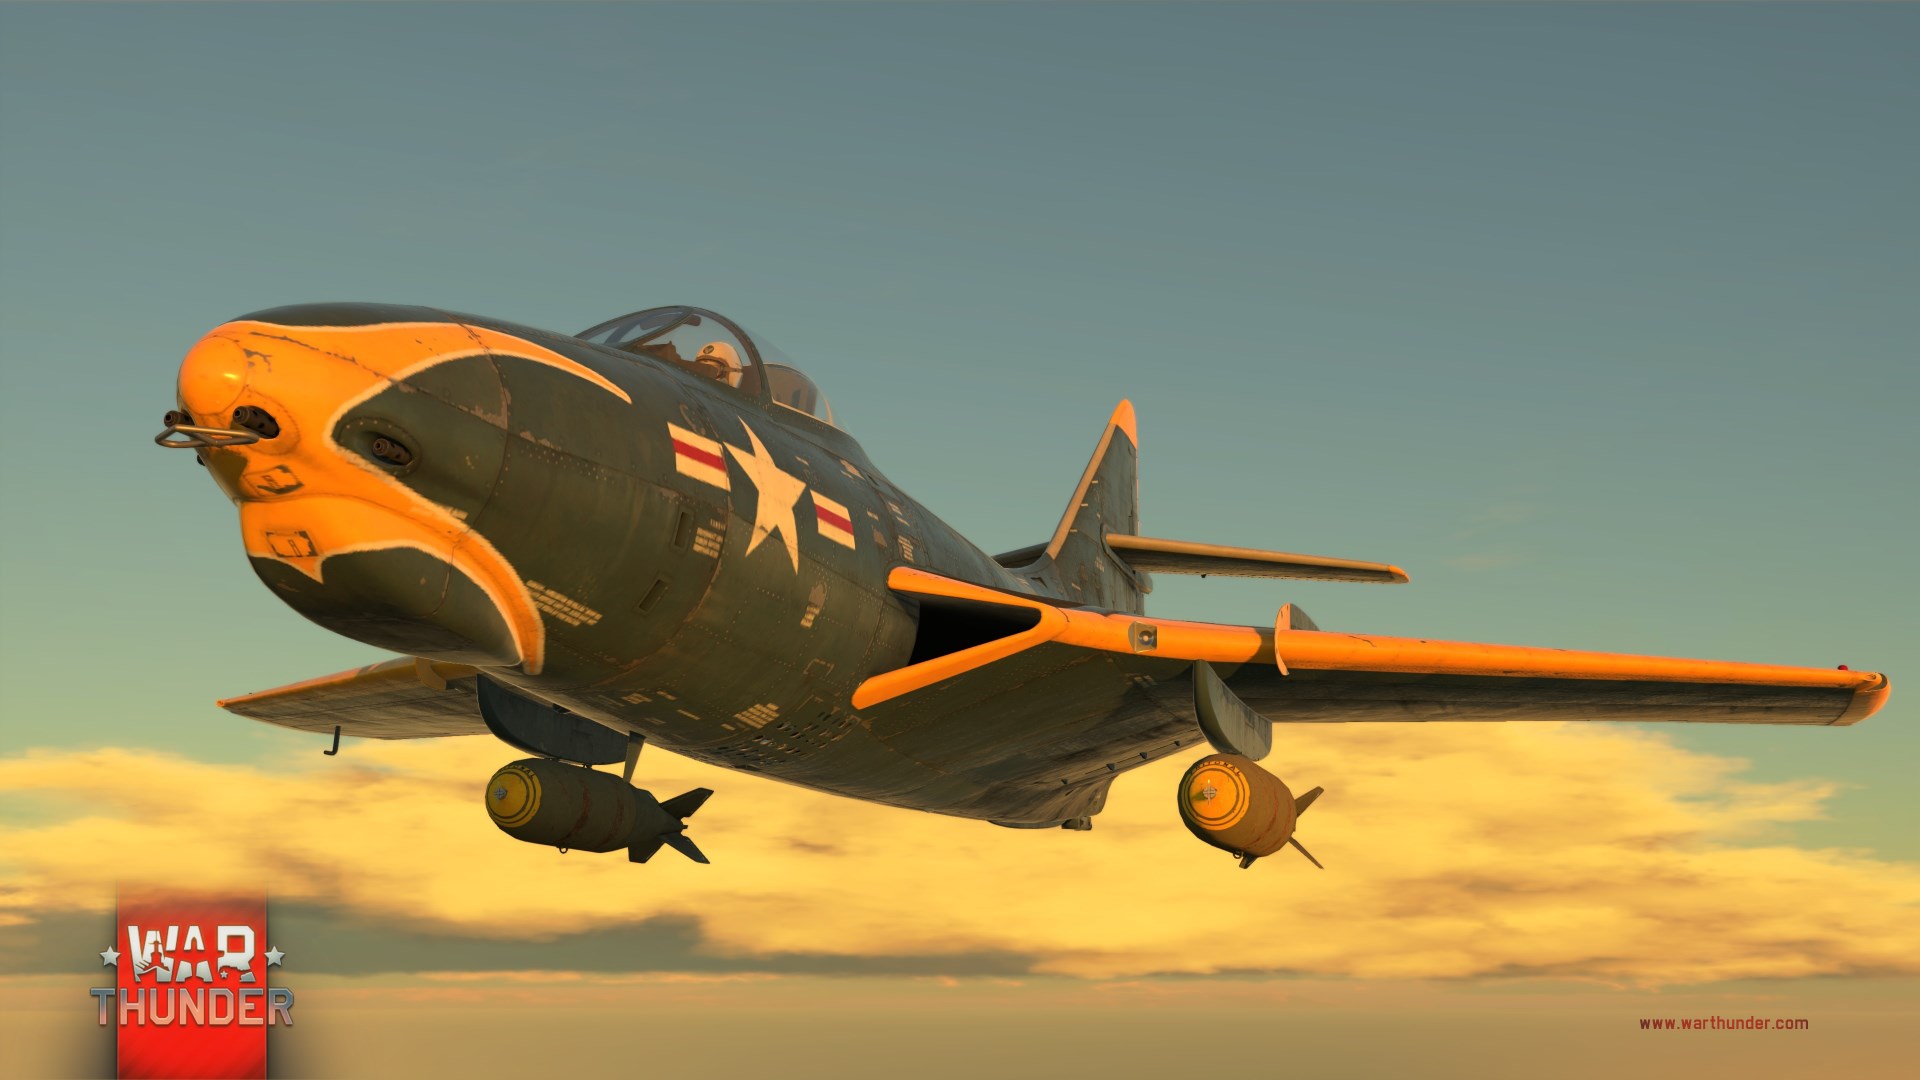 war thunder game download for pc